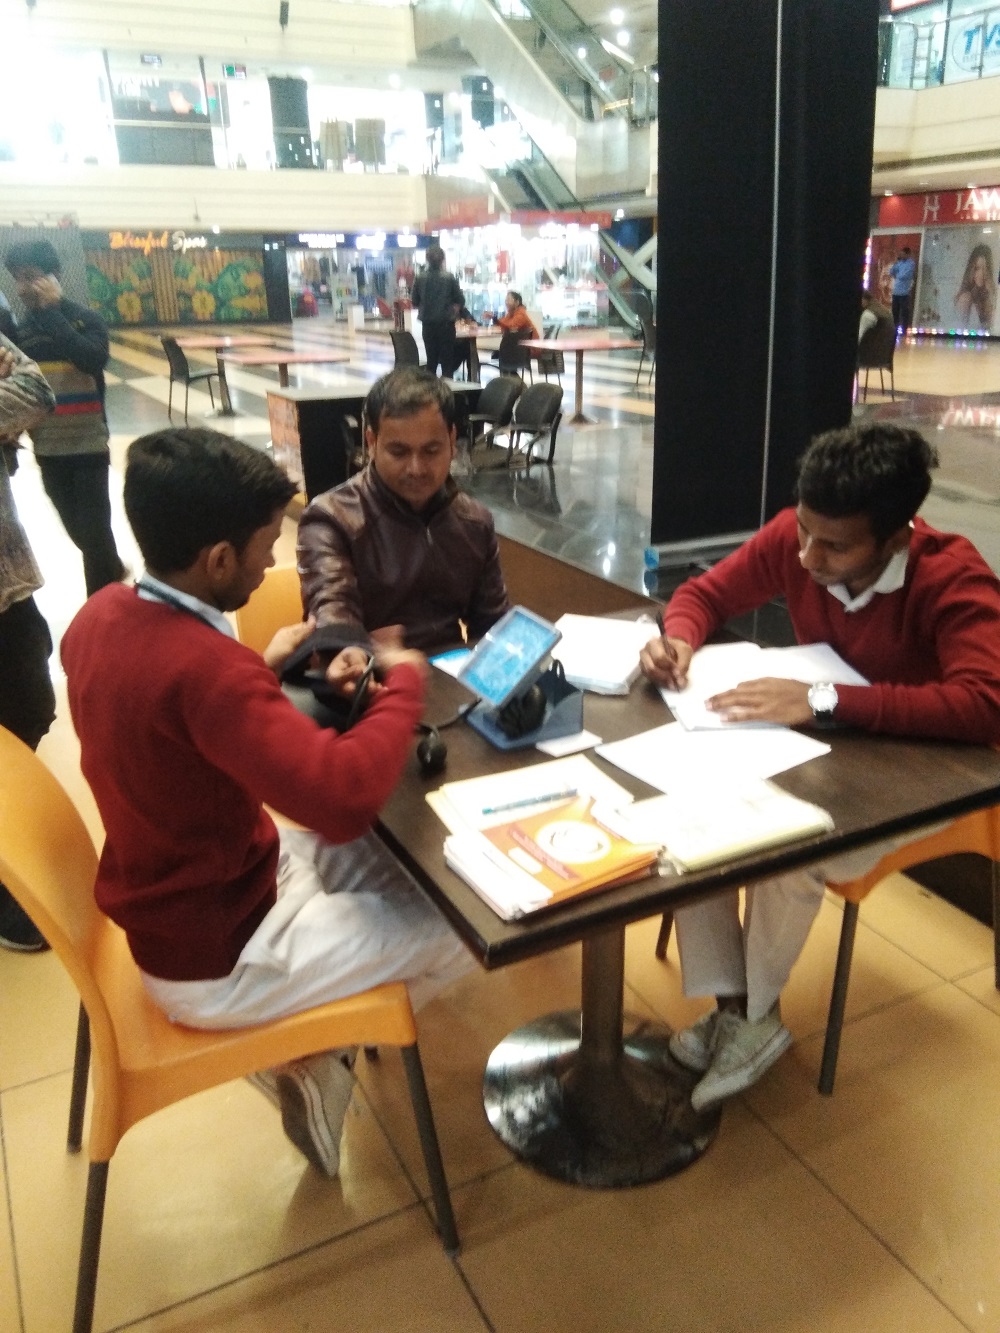 Kailash Charitable Trust in Association With ICICI Prudential is Organized a Free Health Check-up Camp at Wave Mall Sector 18, Noida